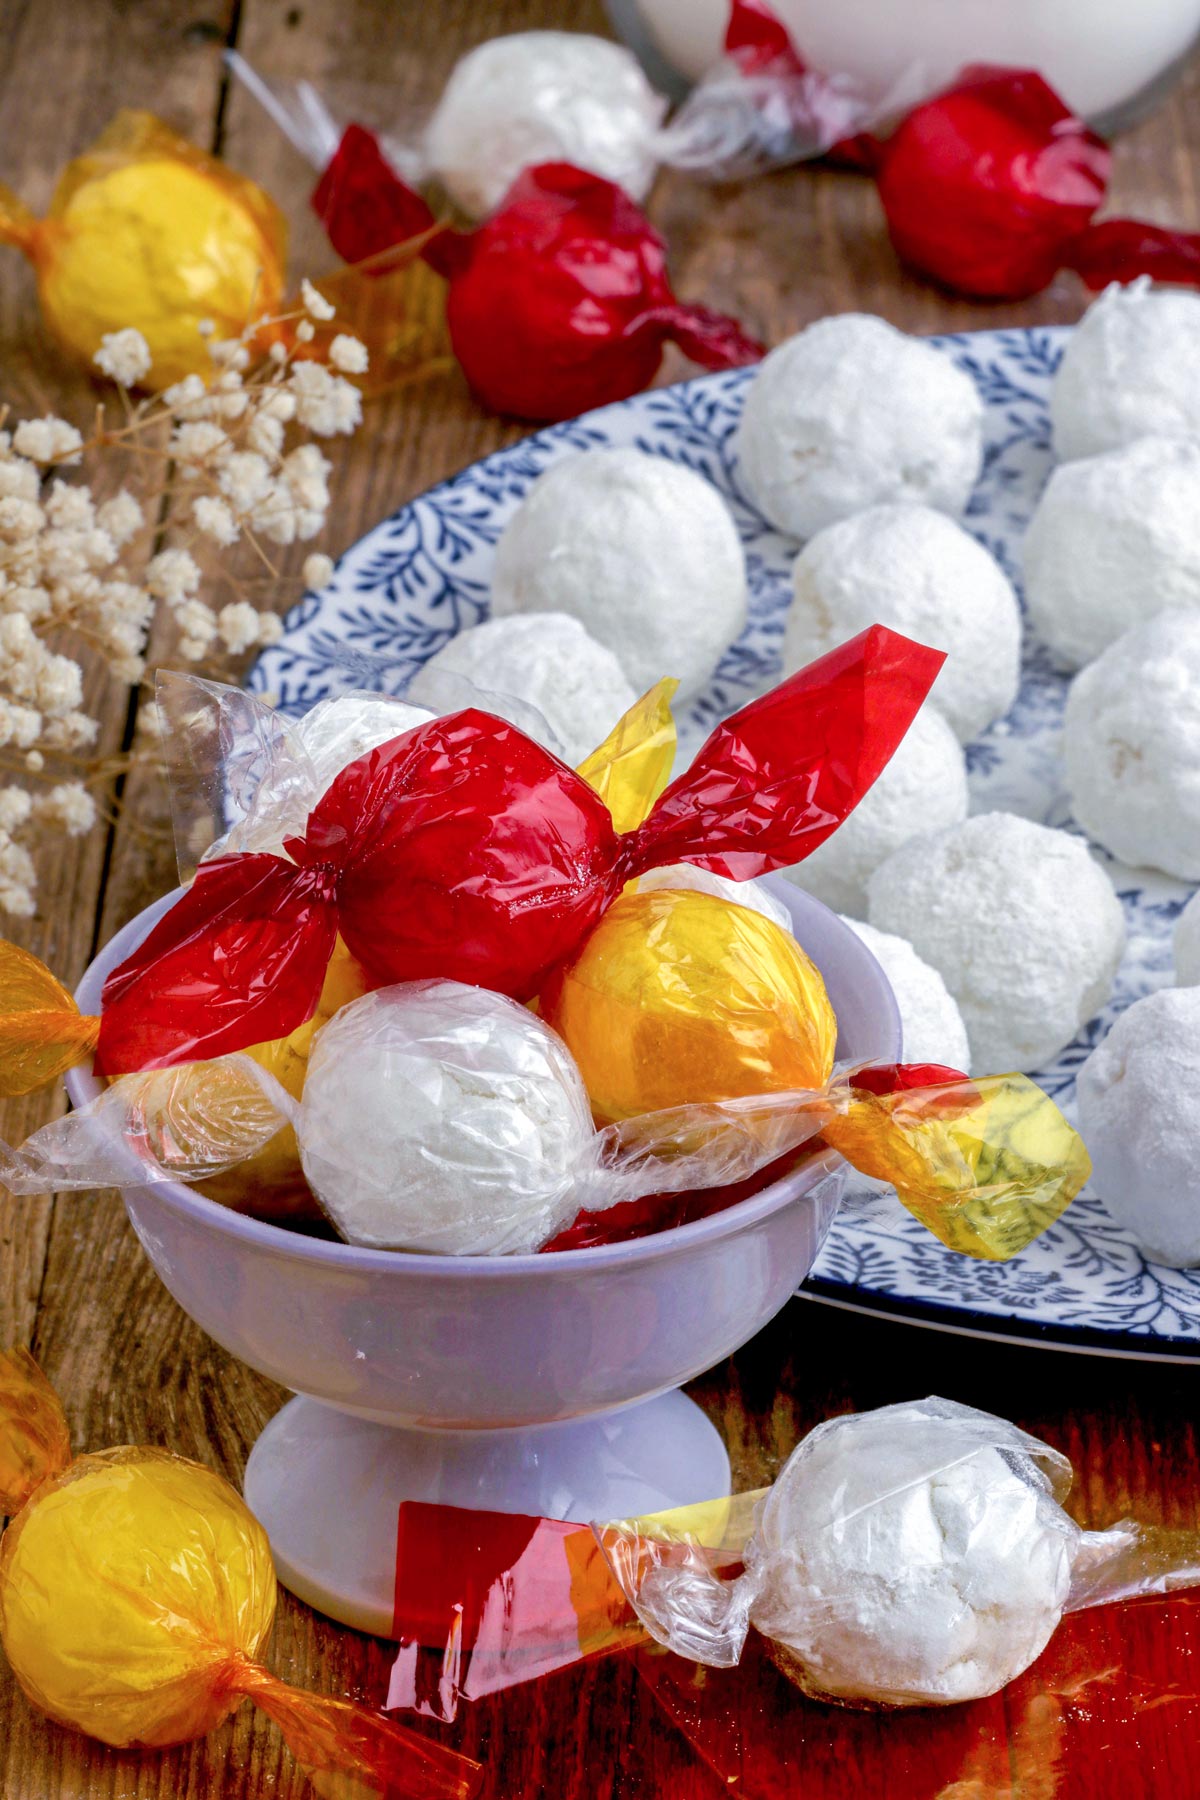 Macapuno Balls made from macapuno preserves and condensed milk wrapped in colorful cellophane plastics.